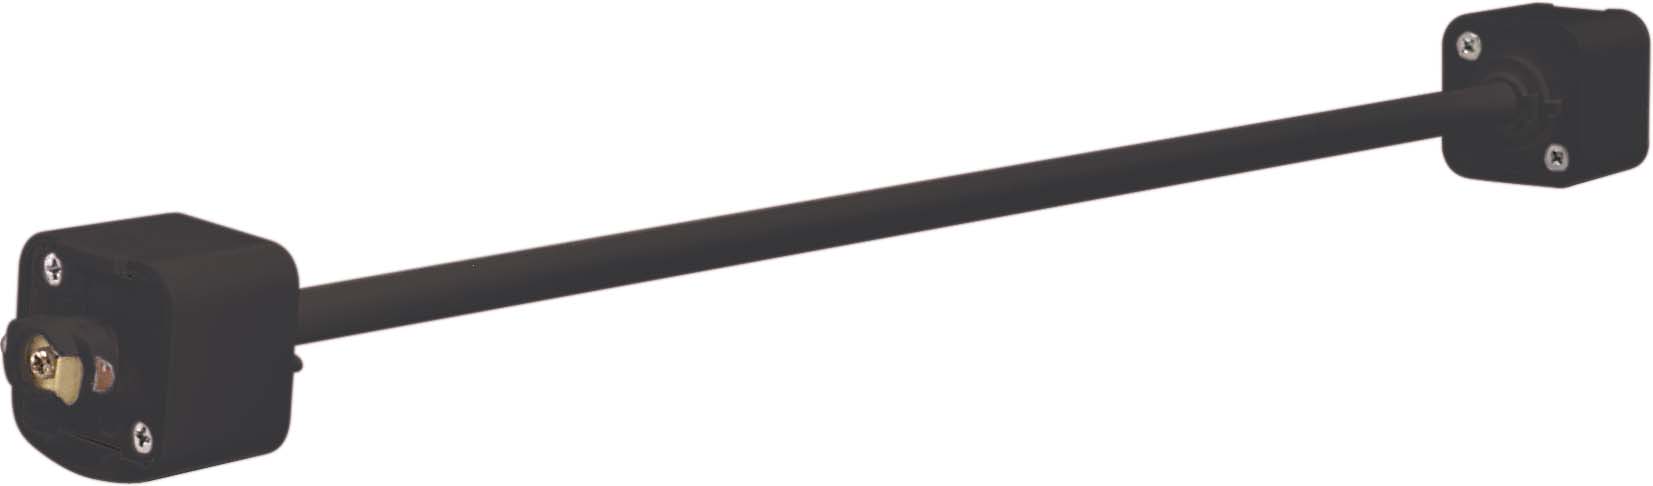 SATCO/NUVO 48 Inch Extension Wand Black Finish (TP166)